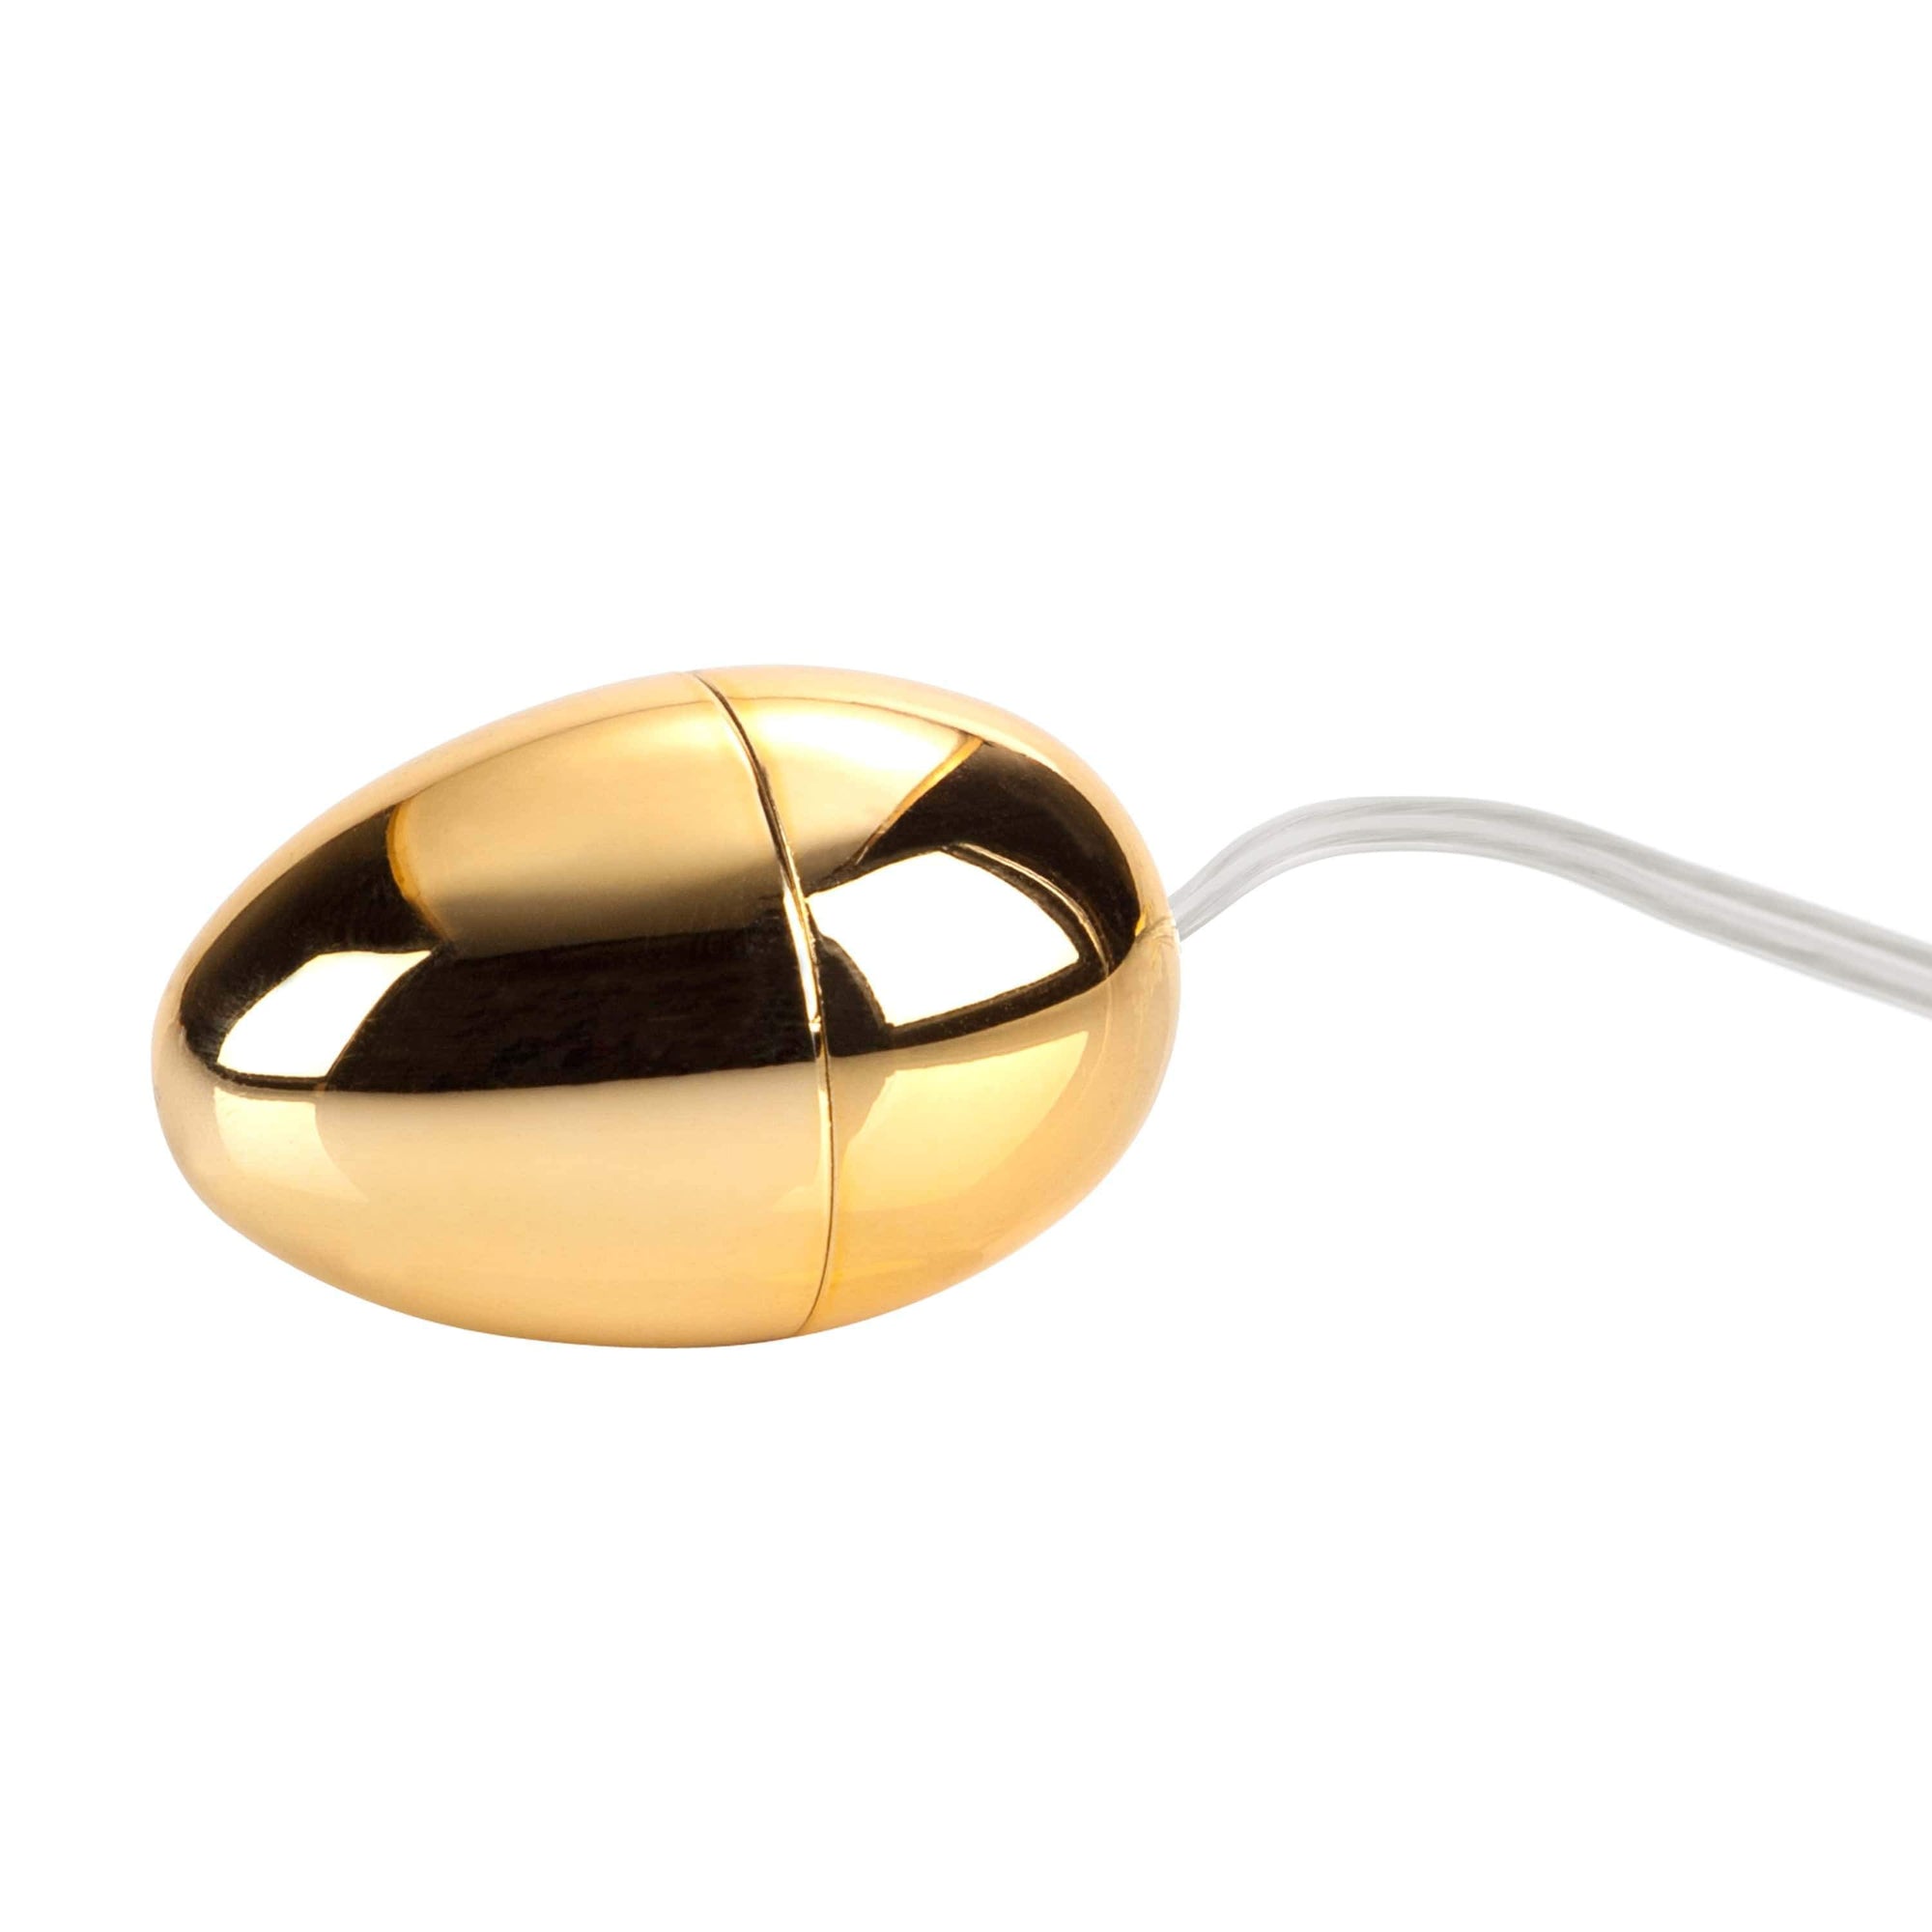 California Exotics - Pocket Exotics Vibrating Gold Egg Massager with Remote (Gold) Wired Remote Control Egg (Vibration) Non Rechargeable 716770003997 CherryAffairs